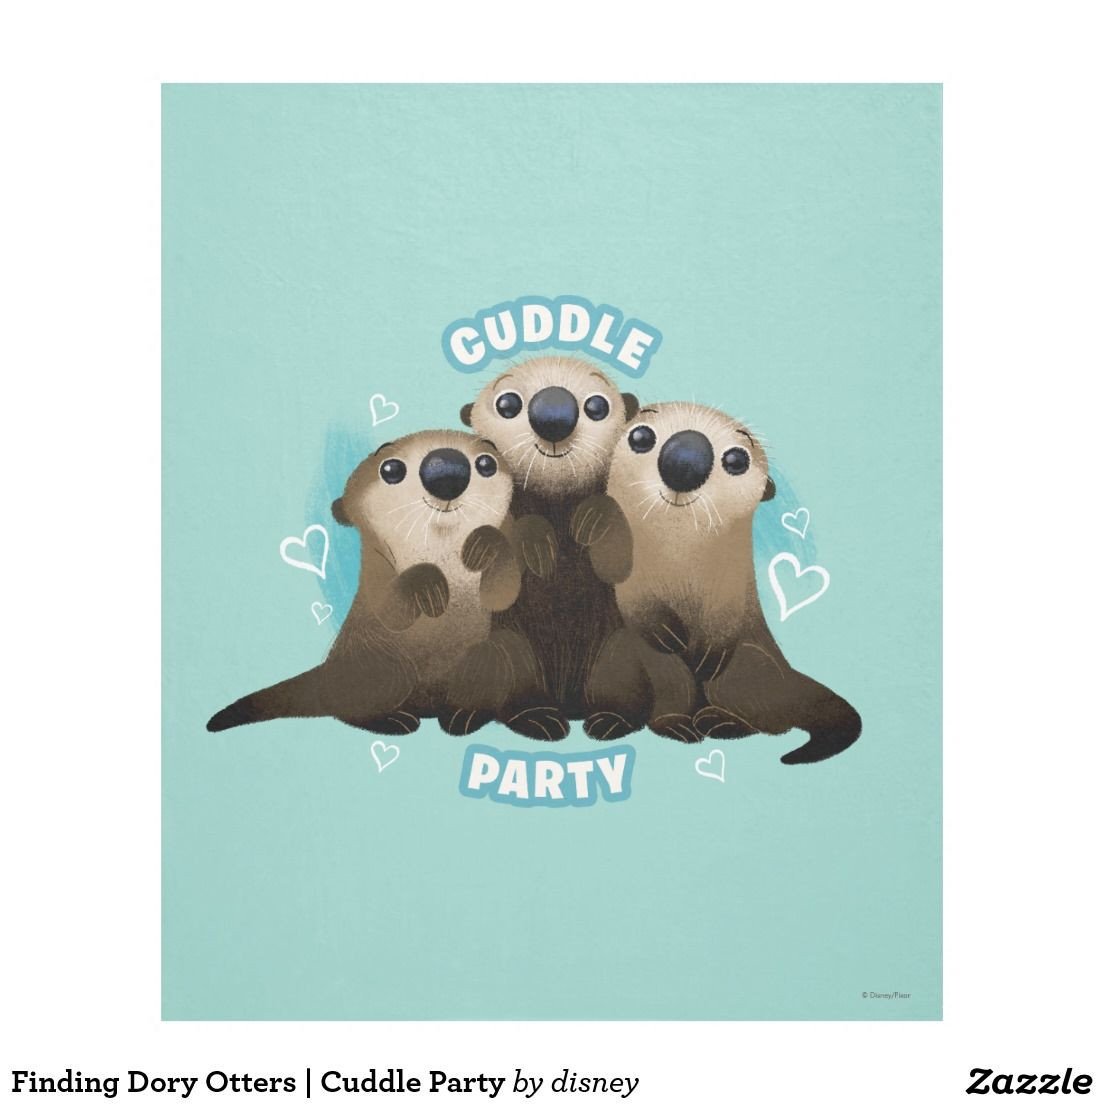 Finding Dory Bedroom Decor Best Of Finding Dory Otters Cuddle Party Fleece Blanket